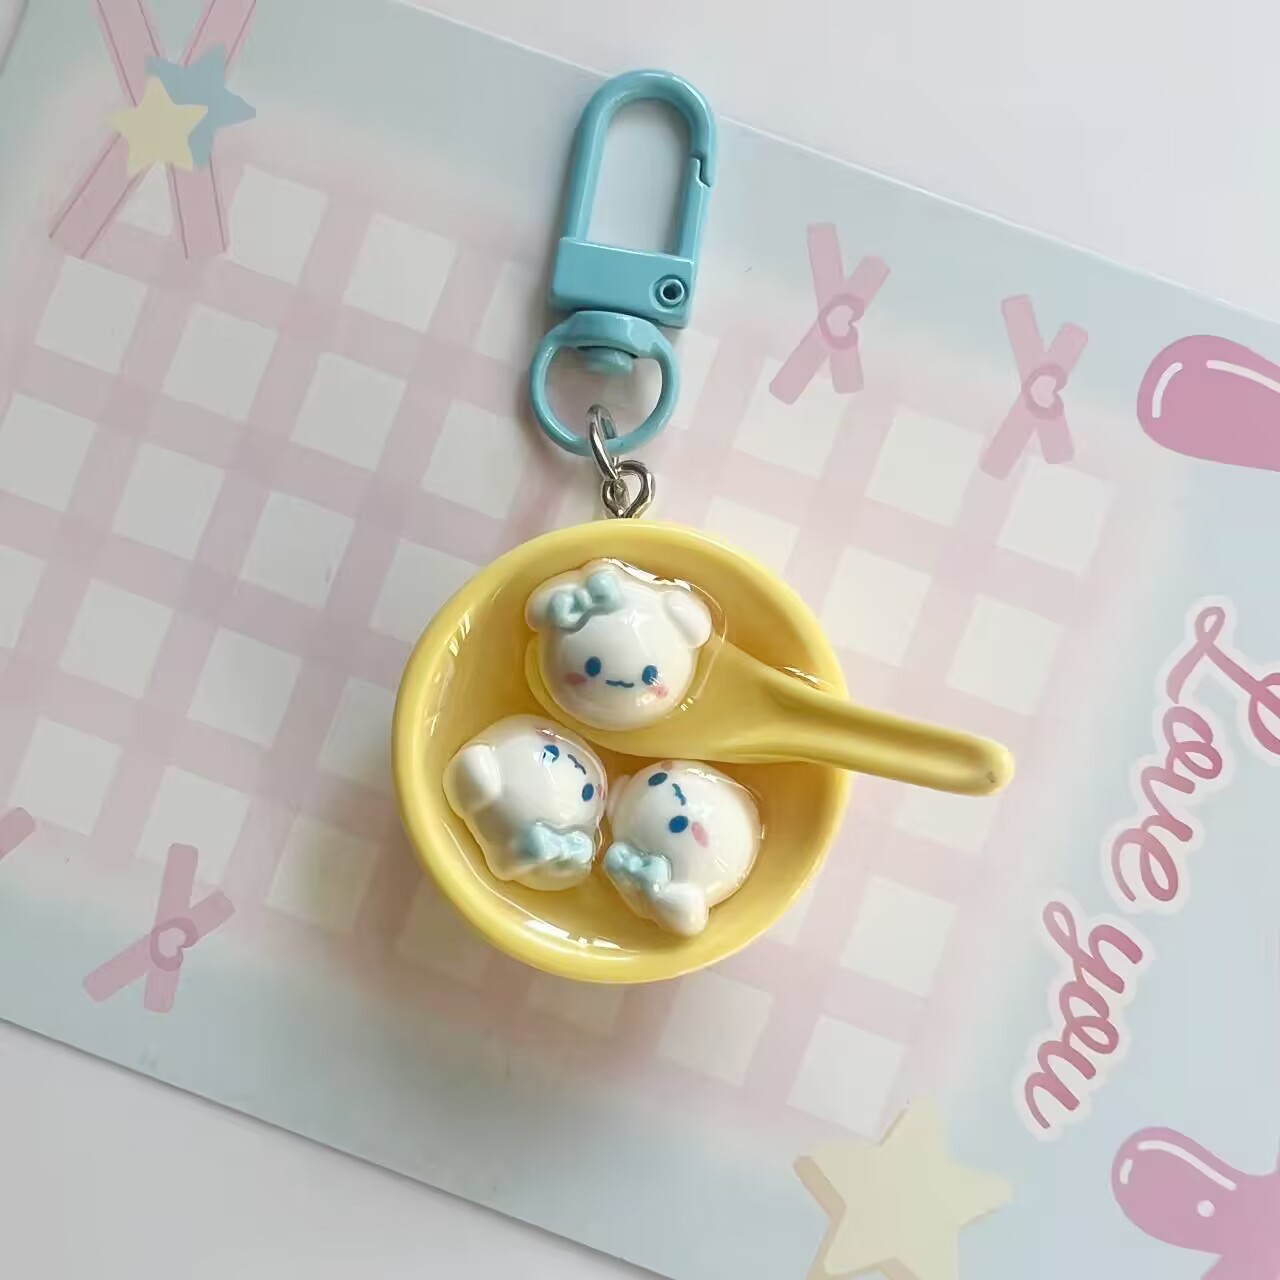 Sanrio Soup round Bowl Keychain Schoolbag Pendant Ins Girl Heart Cartoon Couple Girlfriends Gift Accessories Ornaments